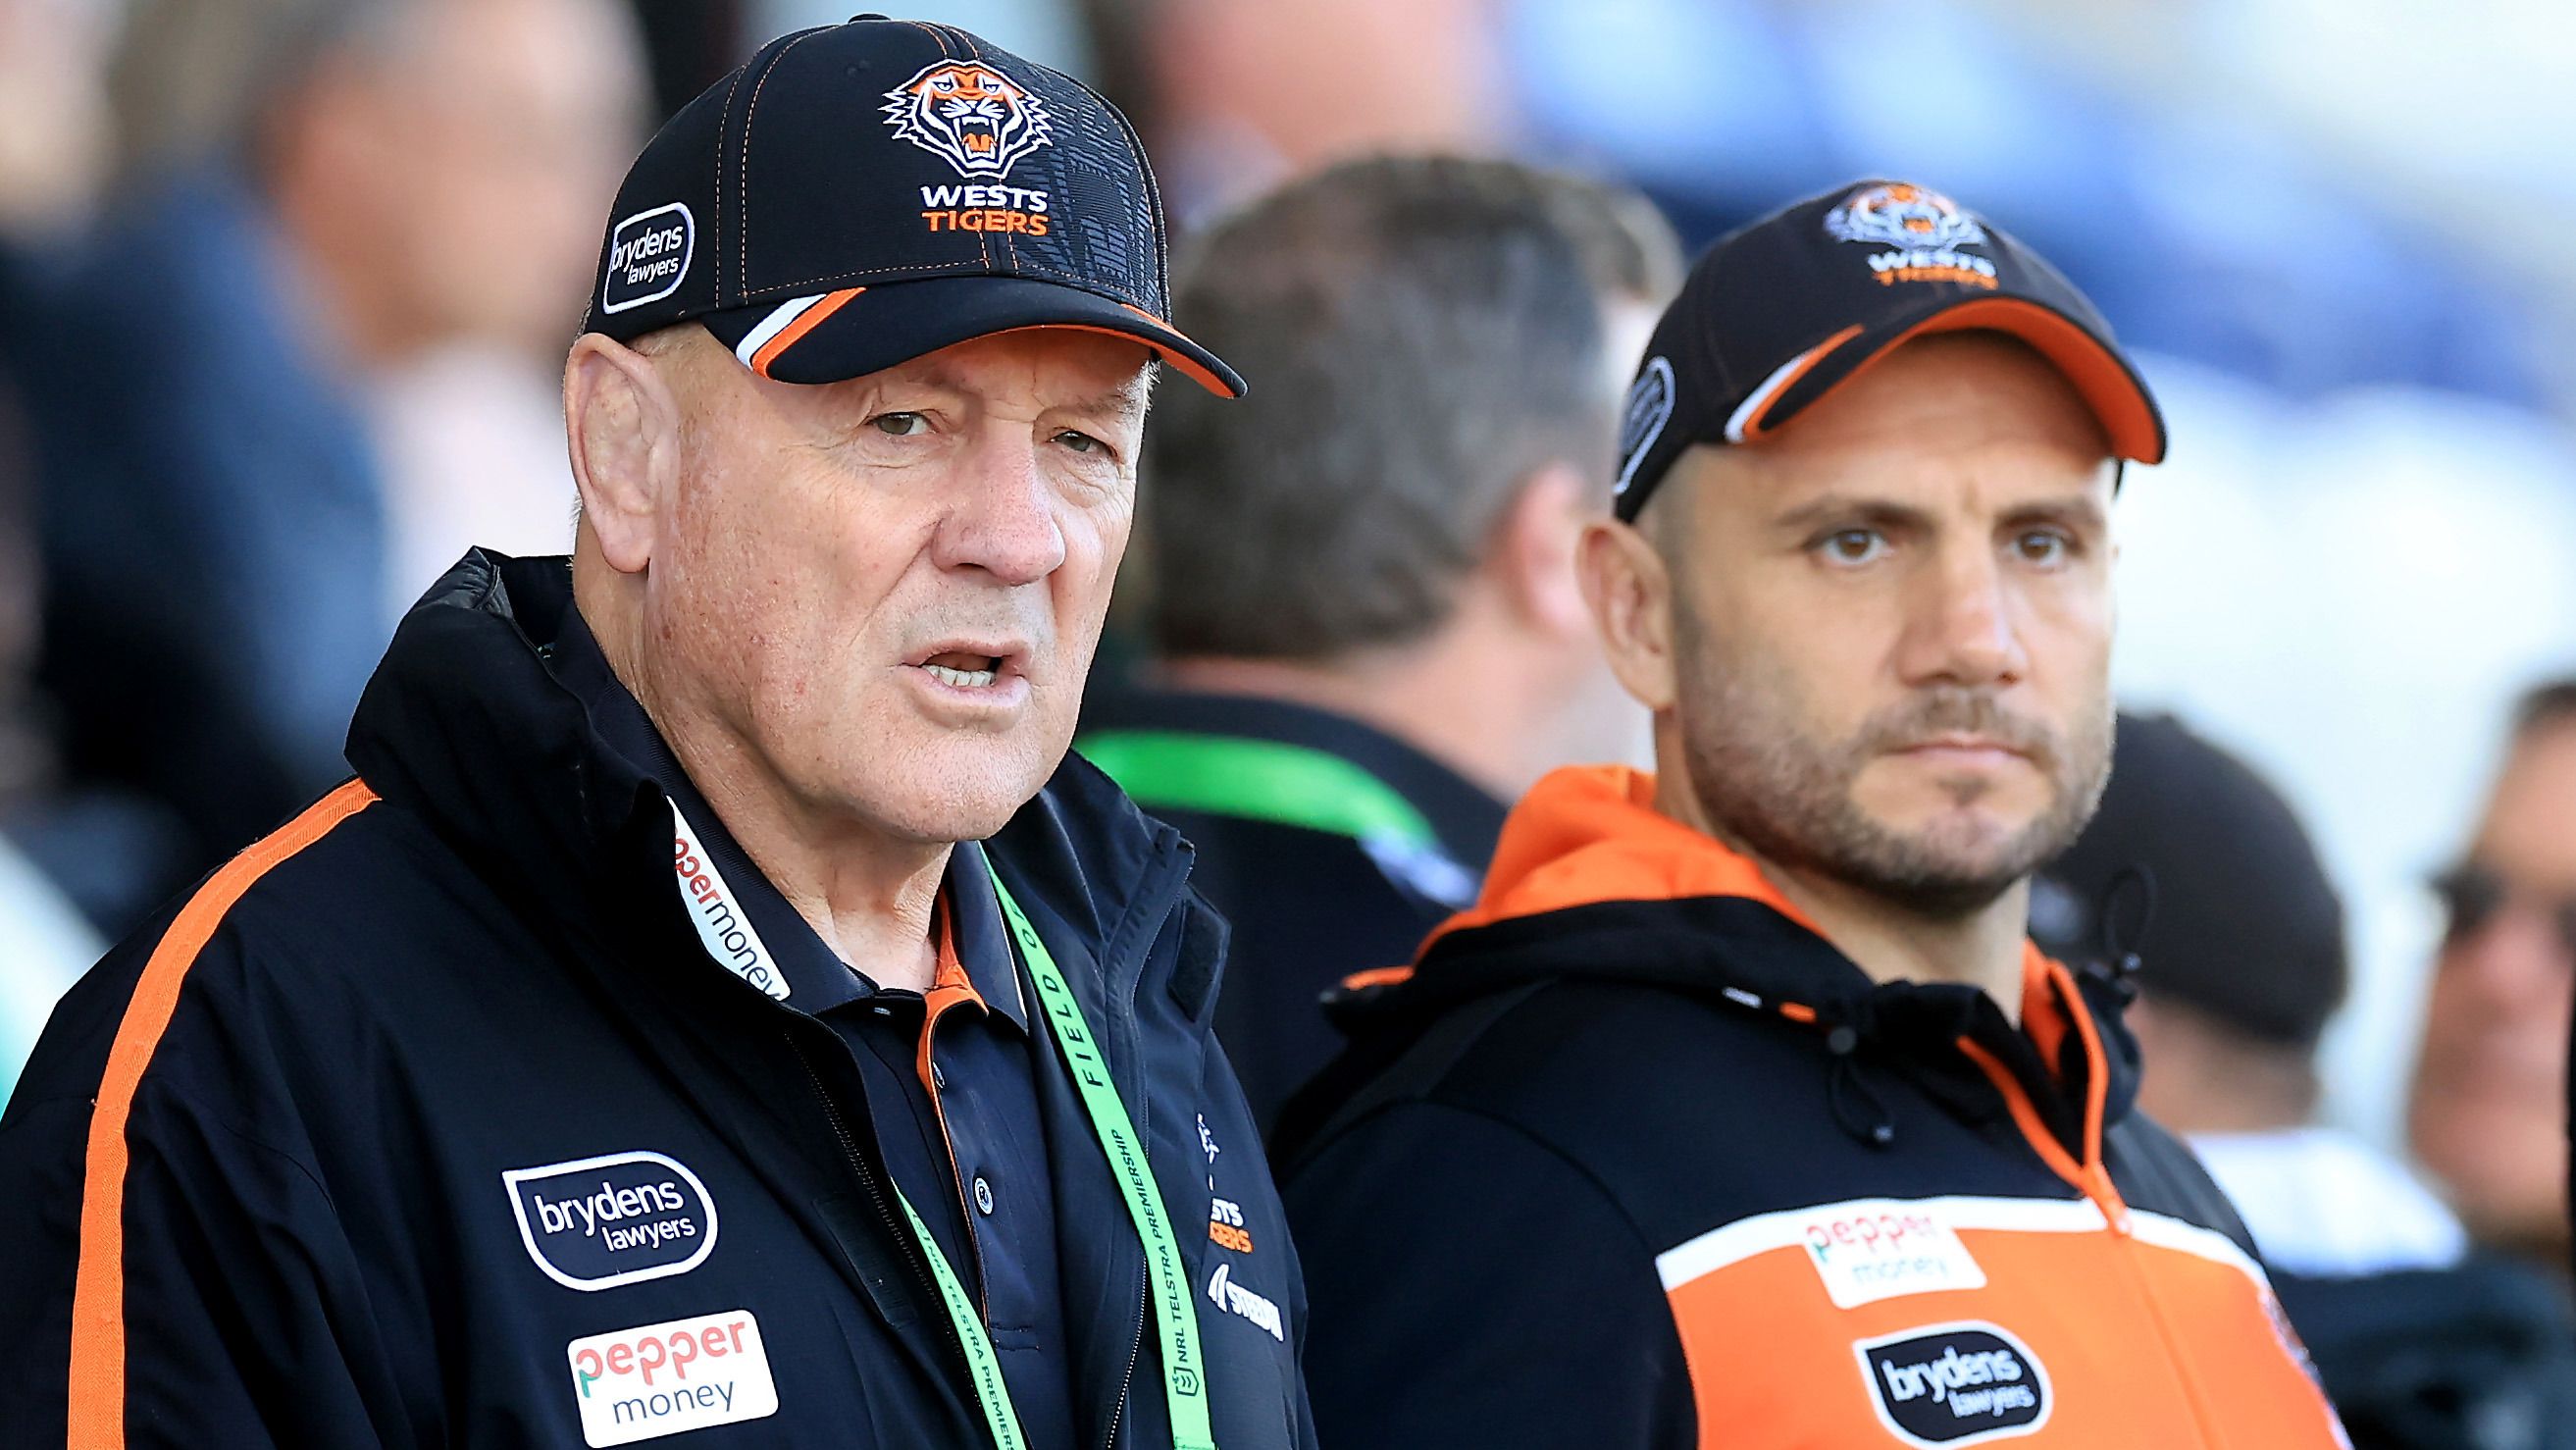 Former Wests Tigers head coach Tim Sheens looks on with assistant coach Robbie Farah.